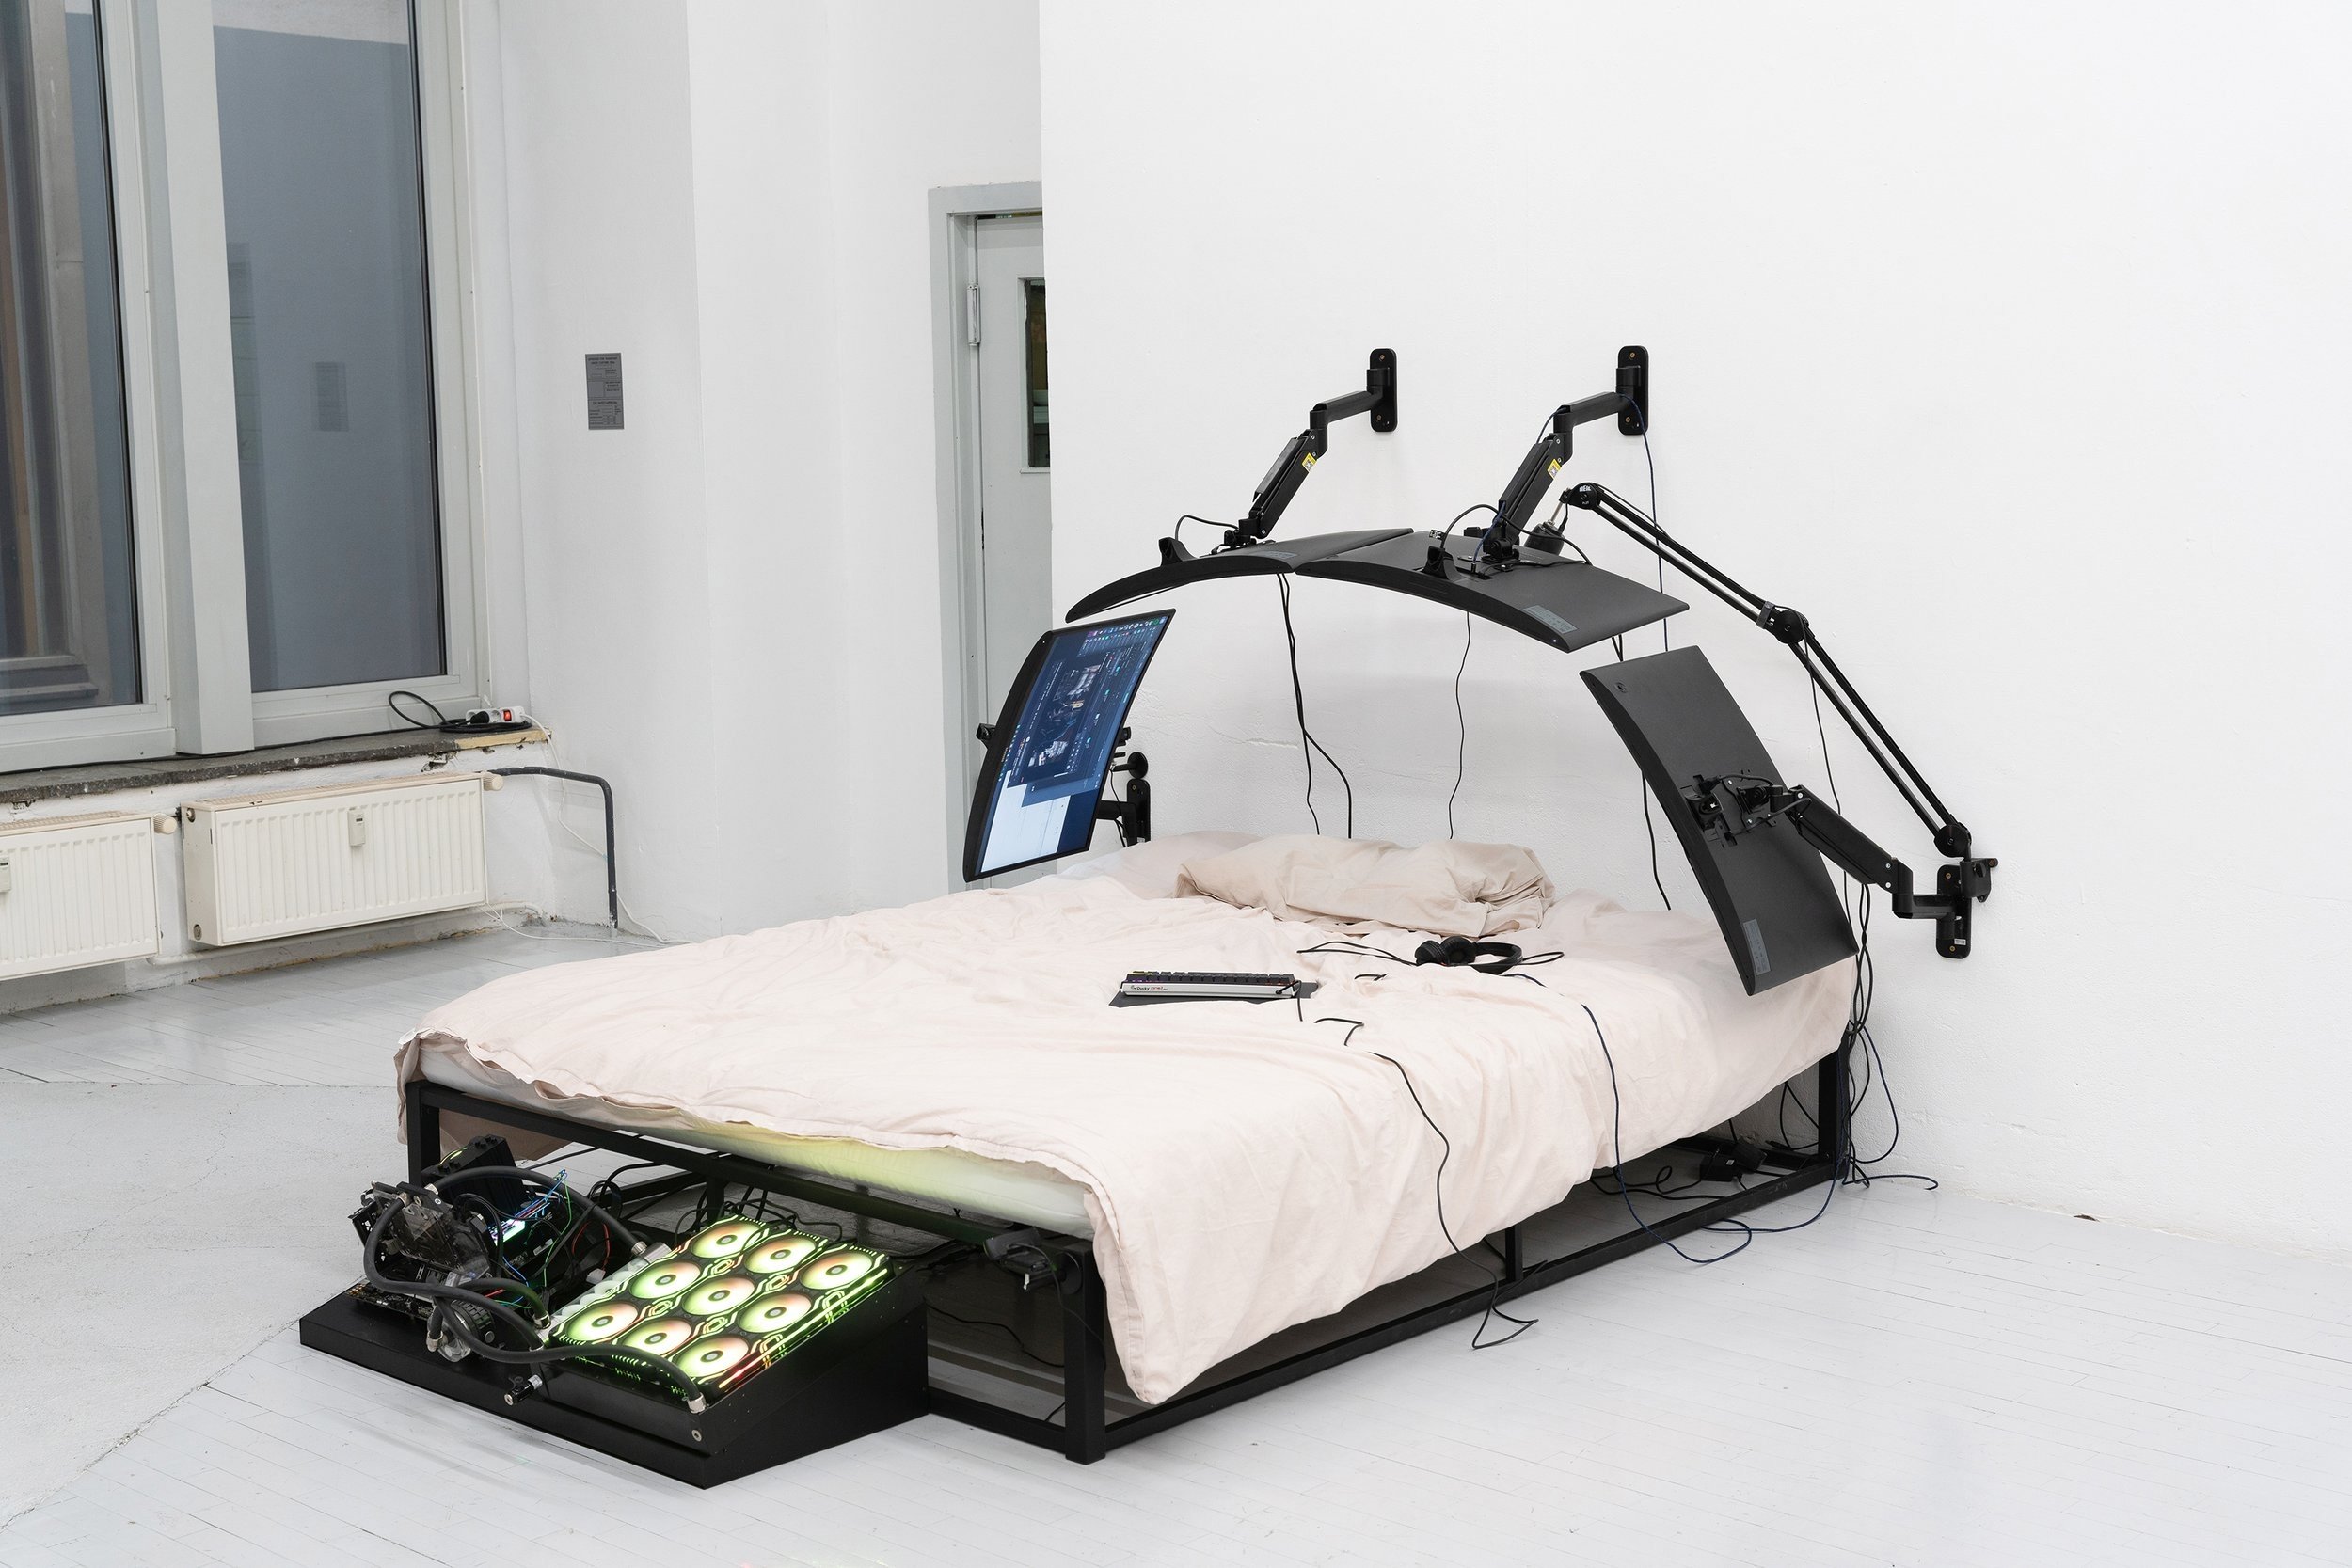  Filip Kostic,  Bed PC 2 , Custom built water cooled computer built into the frame of the bed. Variable screens to create a shield like shape, blanket, and pillows. Variable peripherals including keyboard, mouse, streaming microphone, and cameras for